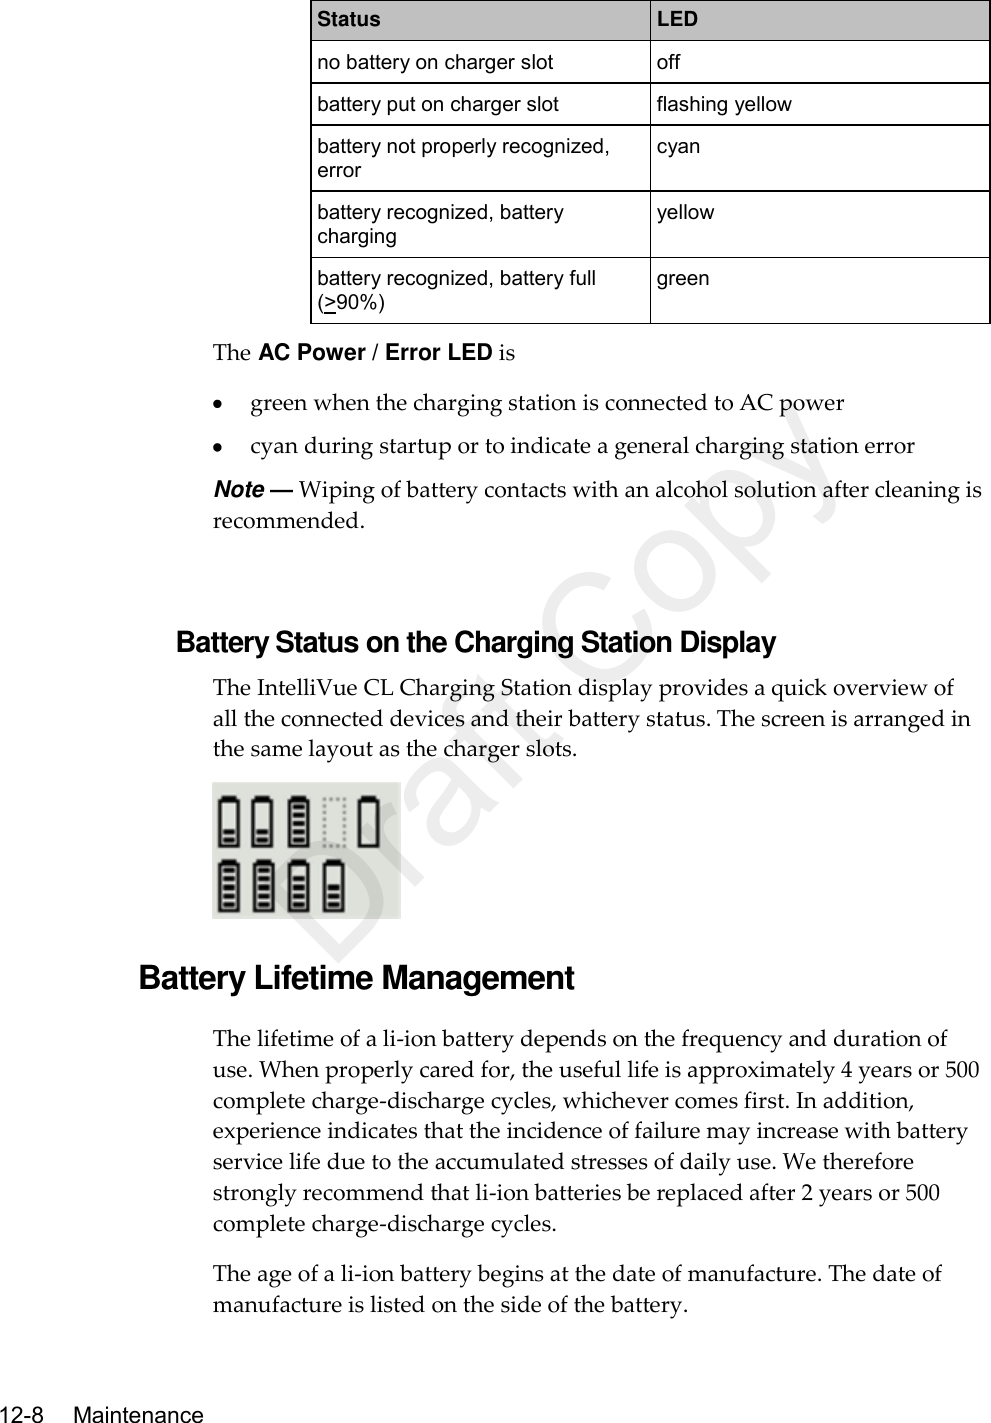   12-8   Maintenance  Status LED no battery on charger slot off battery put on charger slot flashing yellow battery not properly recognized, error cyan battery recognized, battery charging yellow battery recognized, battery full (&gt;90%) green The AC Power / Error LED is  green when the charging station is connected to AC power  cyan during startup or to indicate a general charging station error Note — Wiping of battery contacts with an alcohol solution after cleaning is recommended.   Battery Status on the Charging Station Display The IntelliVue CL Charging Station display provides a quick overview of all the connected devices and their battery status. The screen is arranged in the same layout as the charger slots.   Battery Lifetime Management The lifetime of a li-ion battery depends on the frequency and duration of use. When properly cared for, the useful life is approximately 4 years or 500 complete charge-discharge cycles, whichever comes first. In addition, experience indicates that the incidence of failure may increase with battery service life due to the accumulated stresses of daily use. We therefore strongly recommend that li-ion batteries be replaced after 2 years or 500 complete charge-discharge cycles. The age of a li-ion battery begins at the date of manufacture. The date of manufacture is listed on the side of the battery. Draft Copy